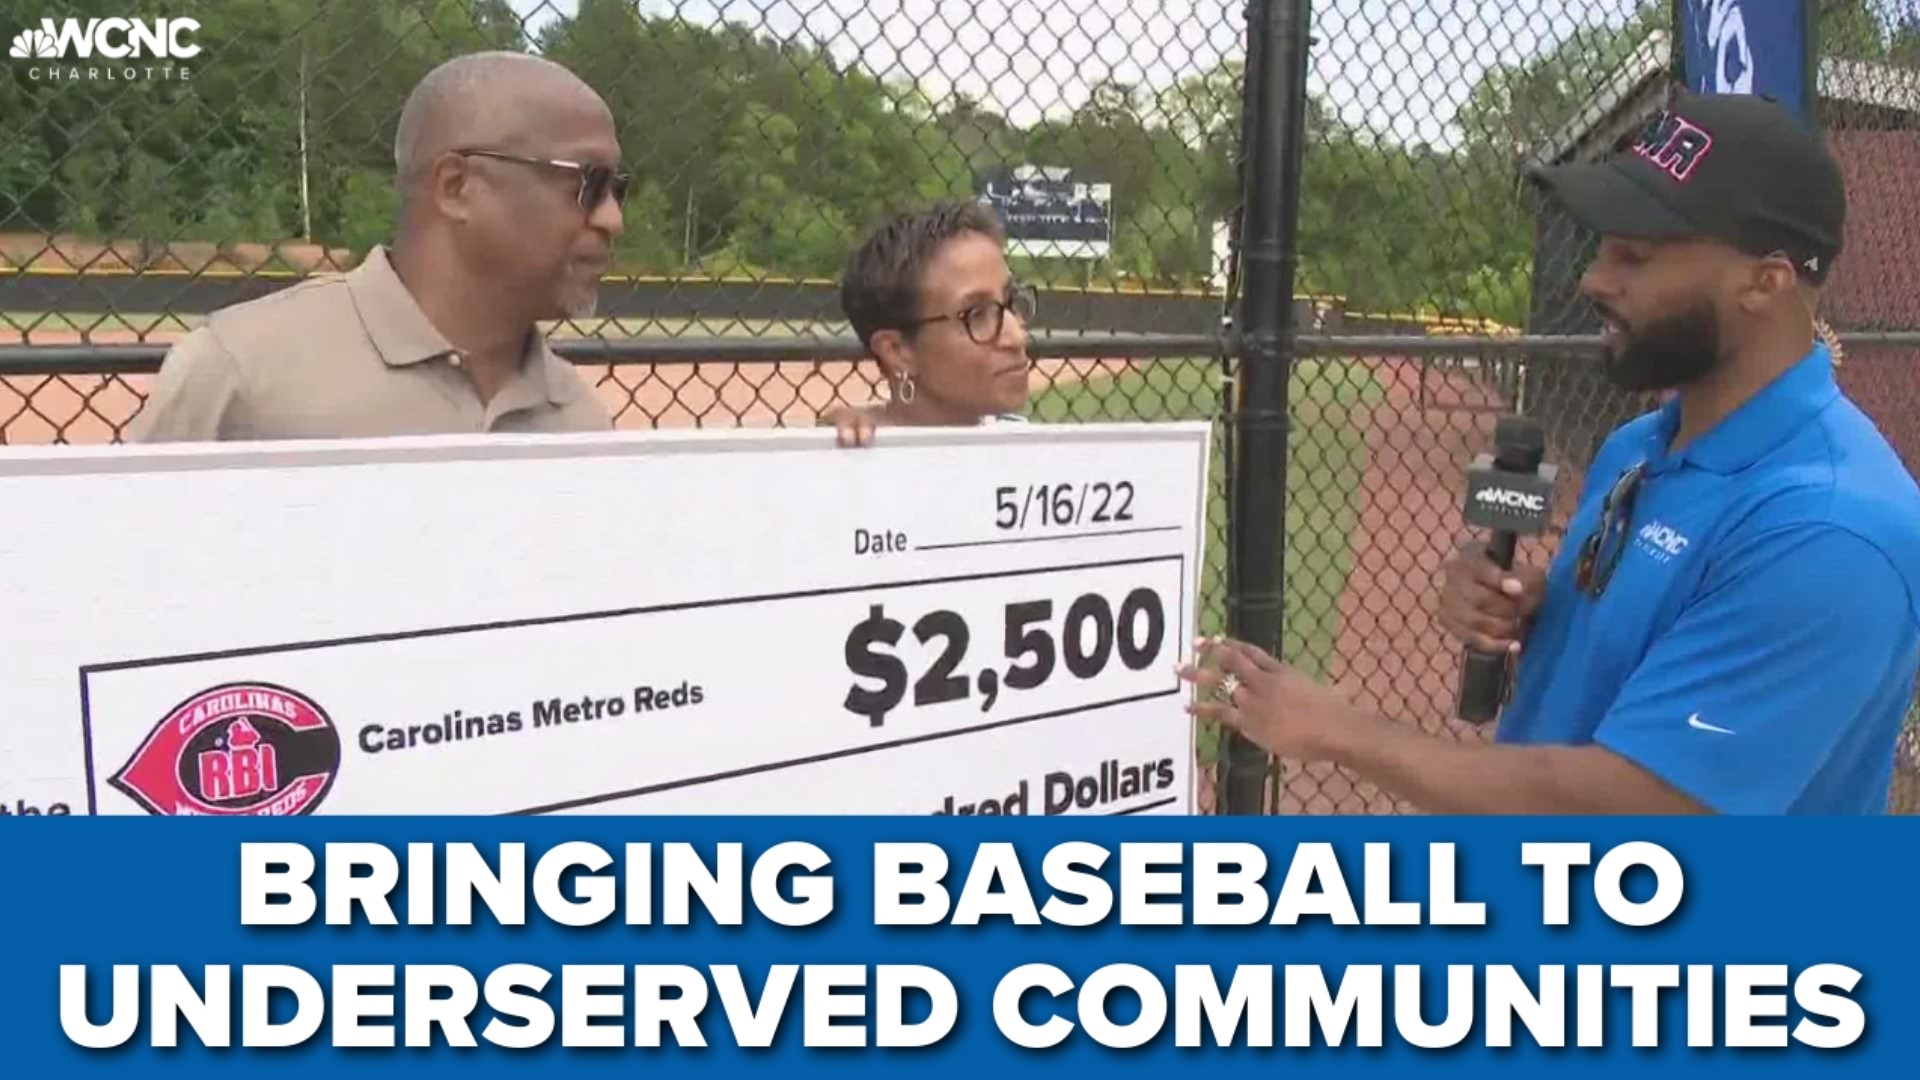 Fred Shropshire spoke to Roger and Claudette Parham about their efforts to help Carolinas Metro Reds.